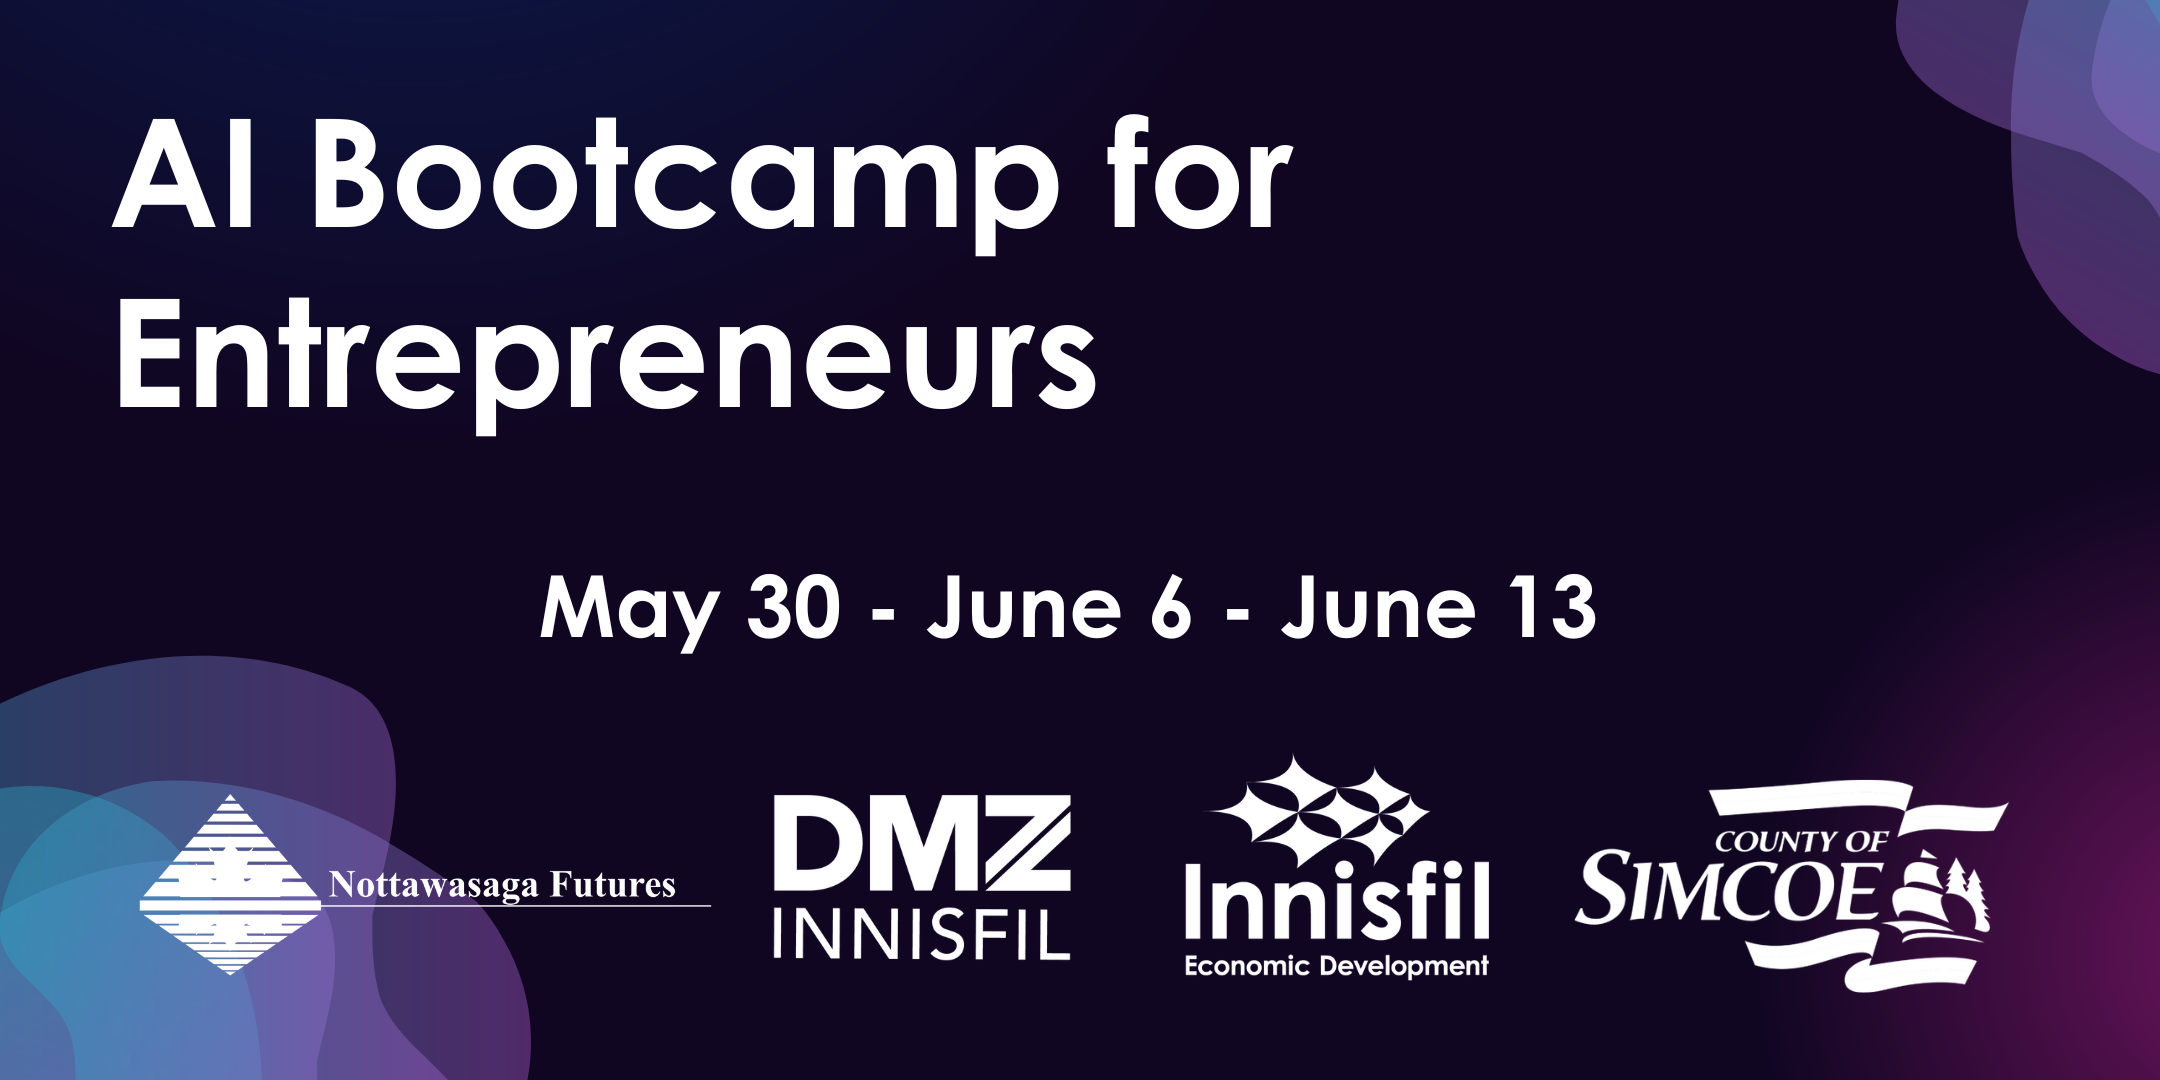 Event poster for the AI Bootcamp for Entrepreneurs